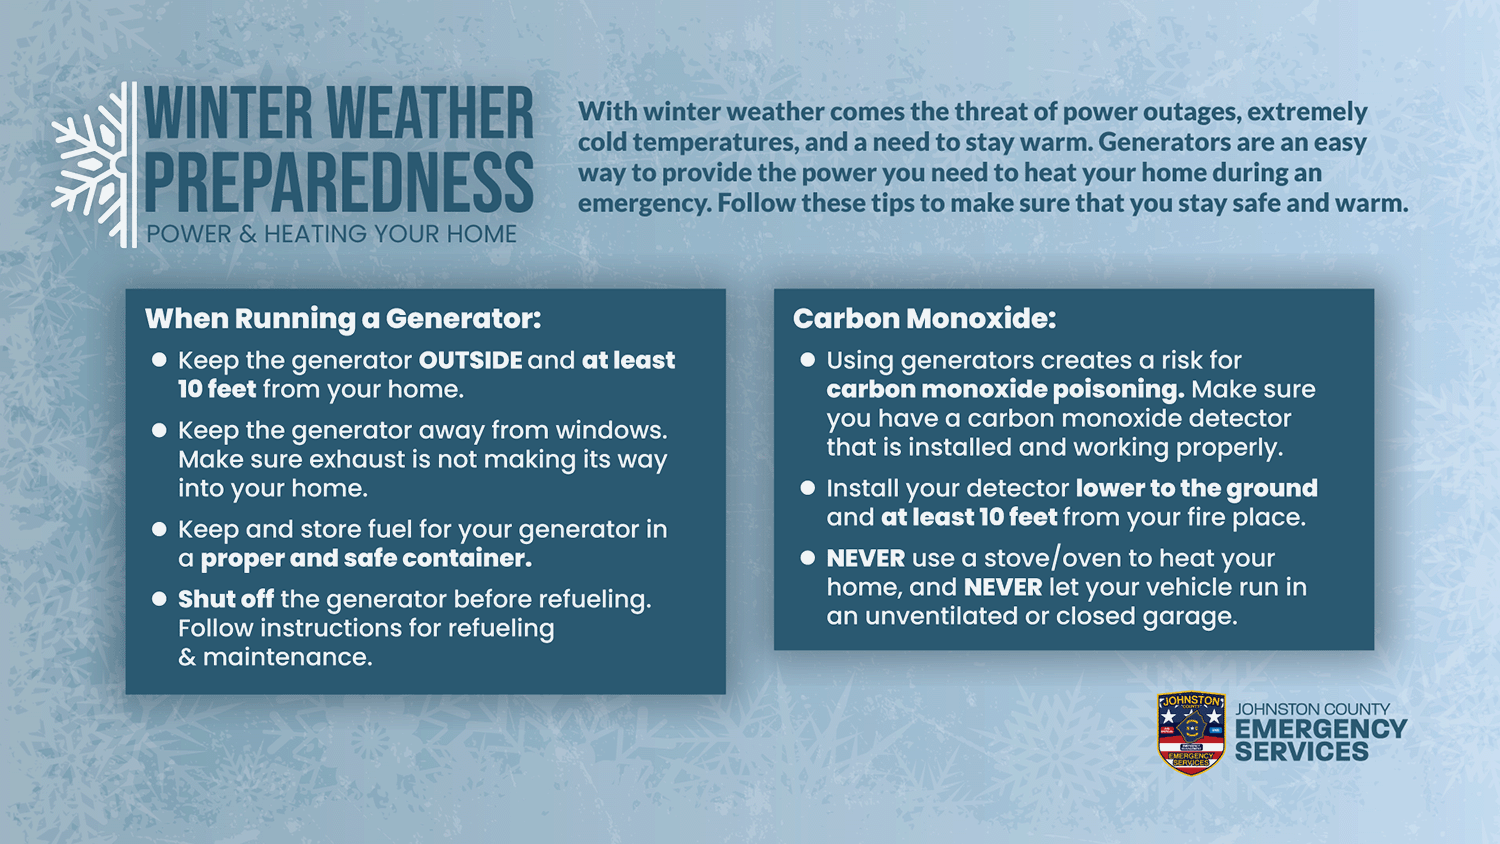 Winter Weather Preparedness Power & Heating Your Home Infographic